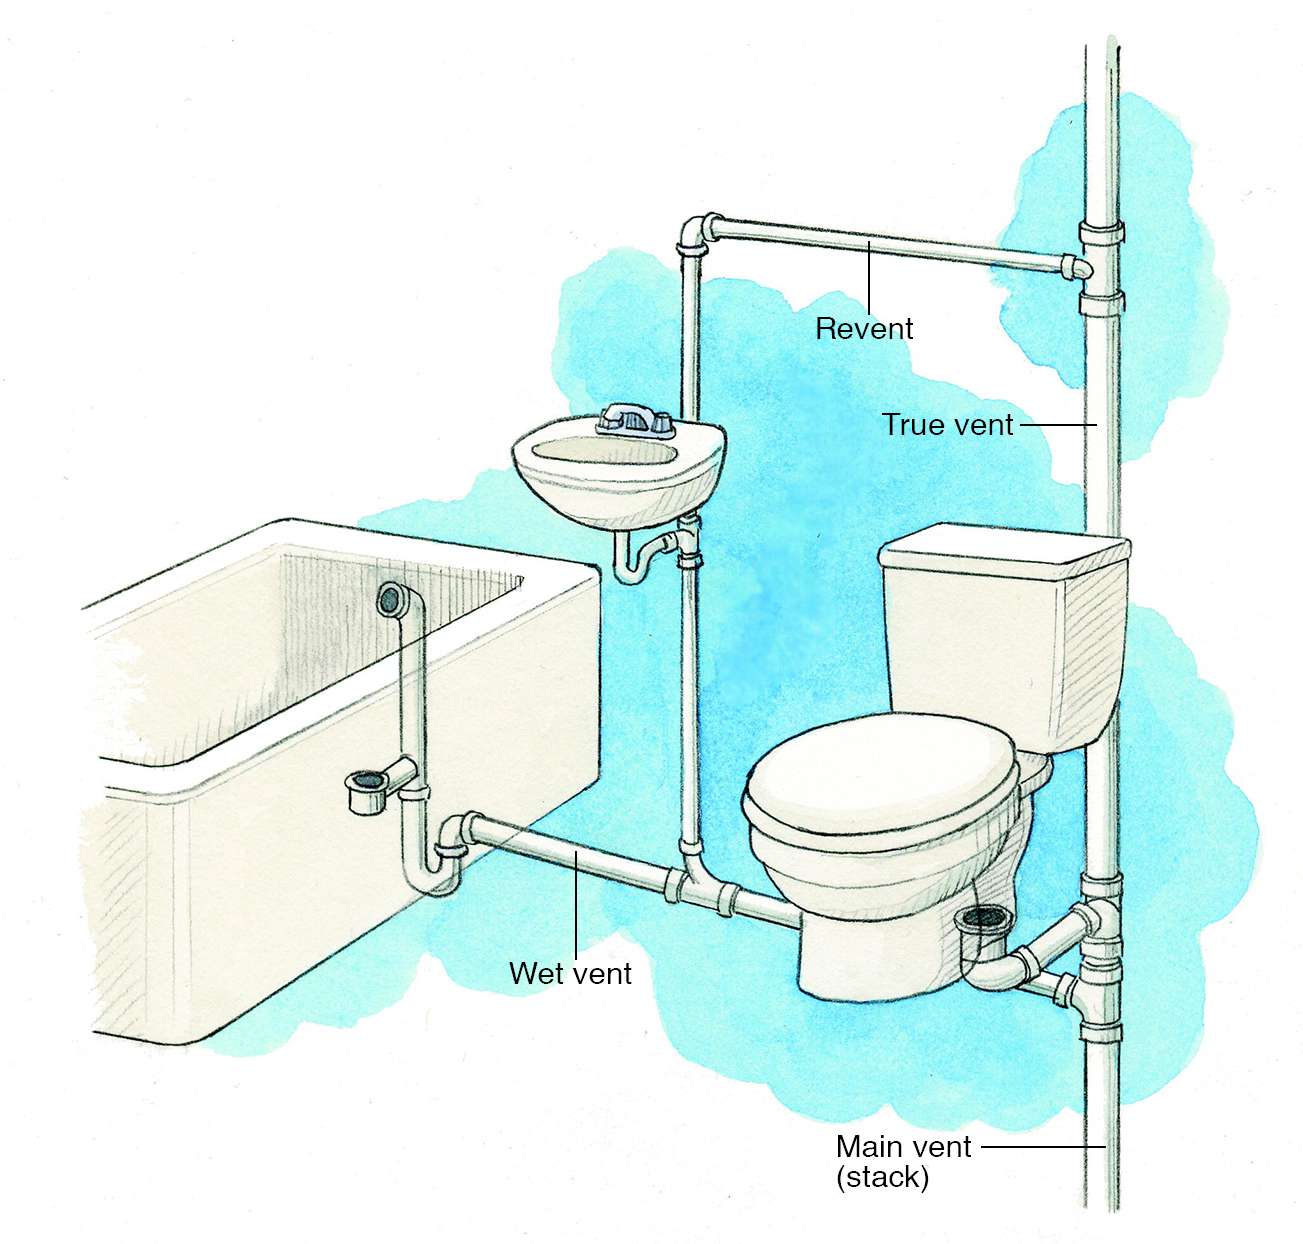 Everything You Need To Know About Venting For Successful Diy Plumbing Work Better Homes Gardens